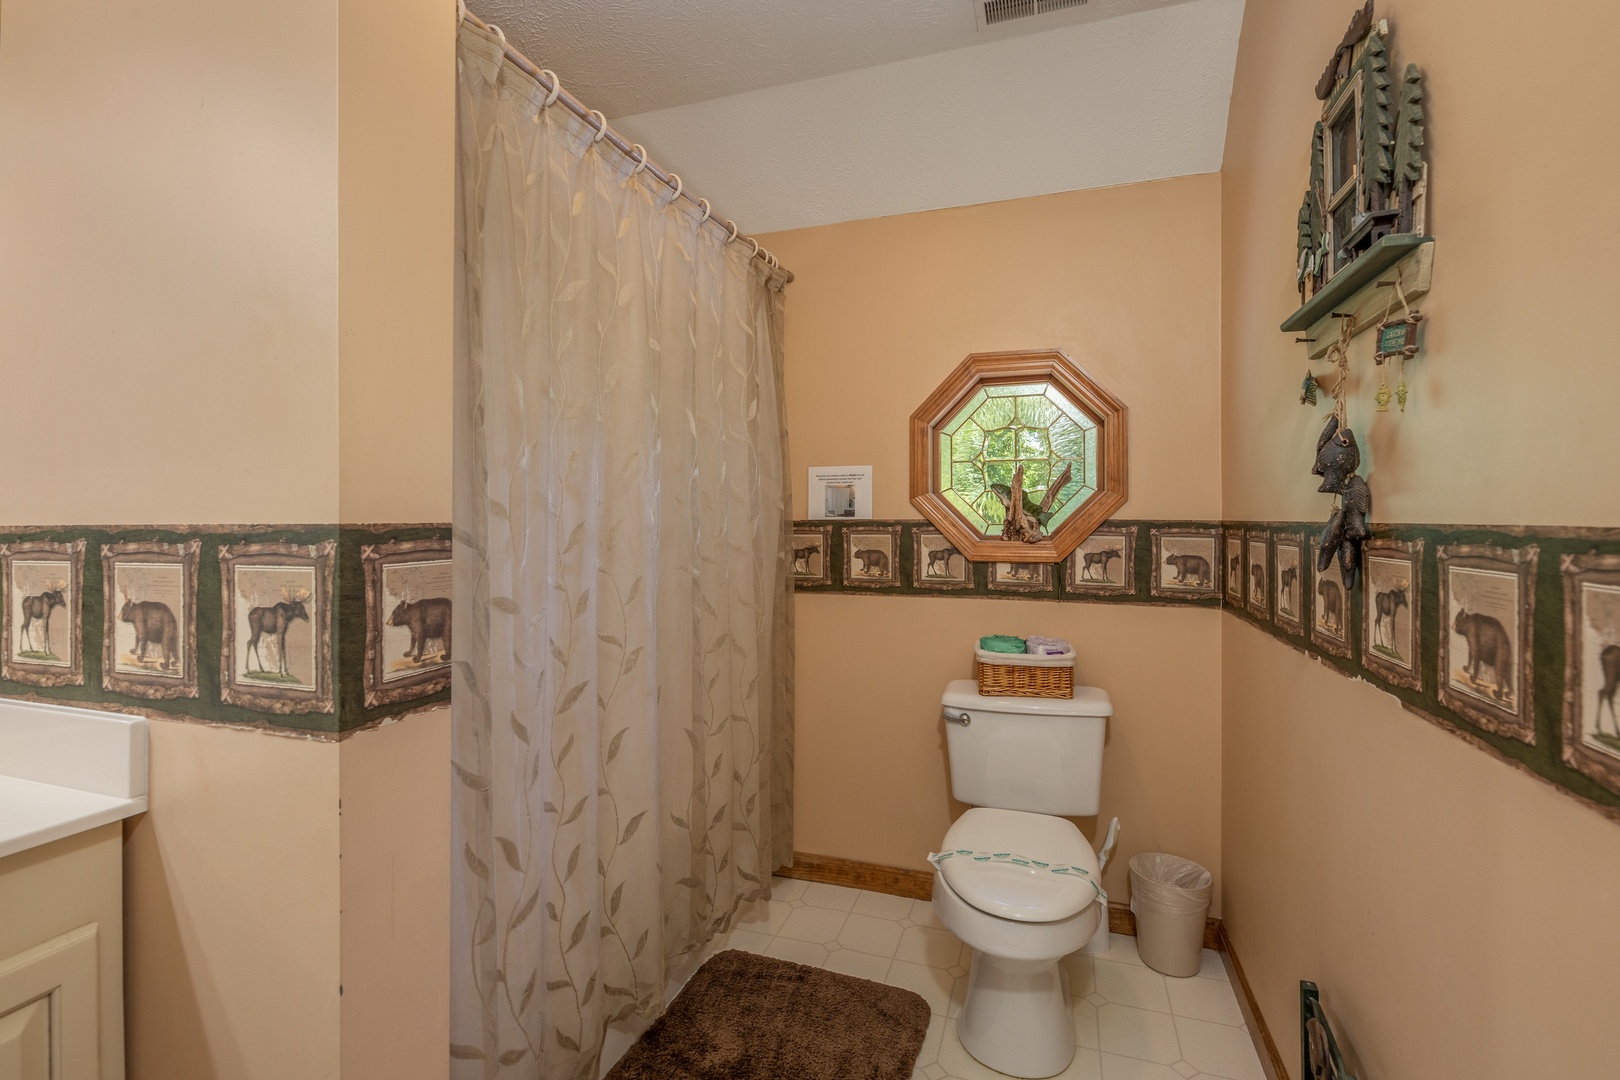 Bathroom in the loft space at Amazing Memories, a 3 bedroom cabin rental located in Pigeon Forge